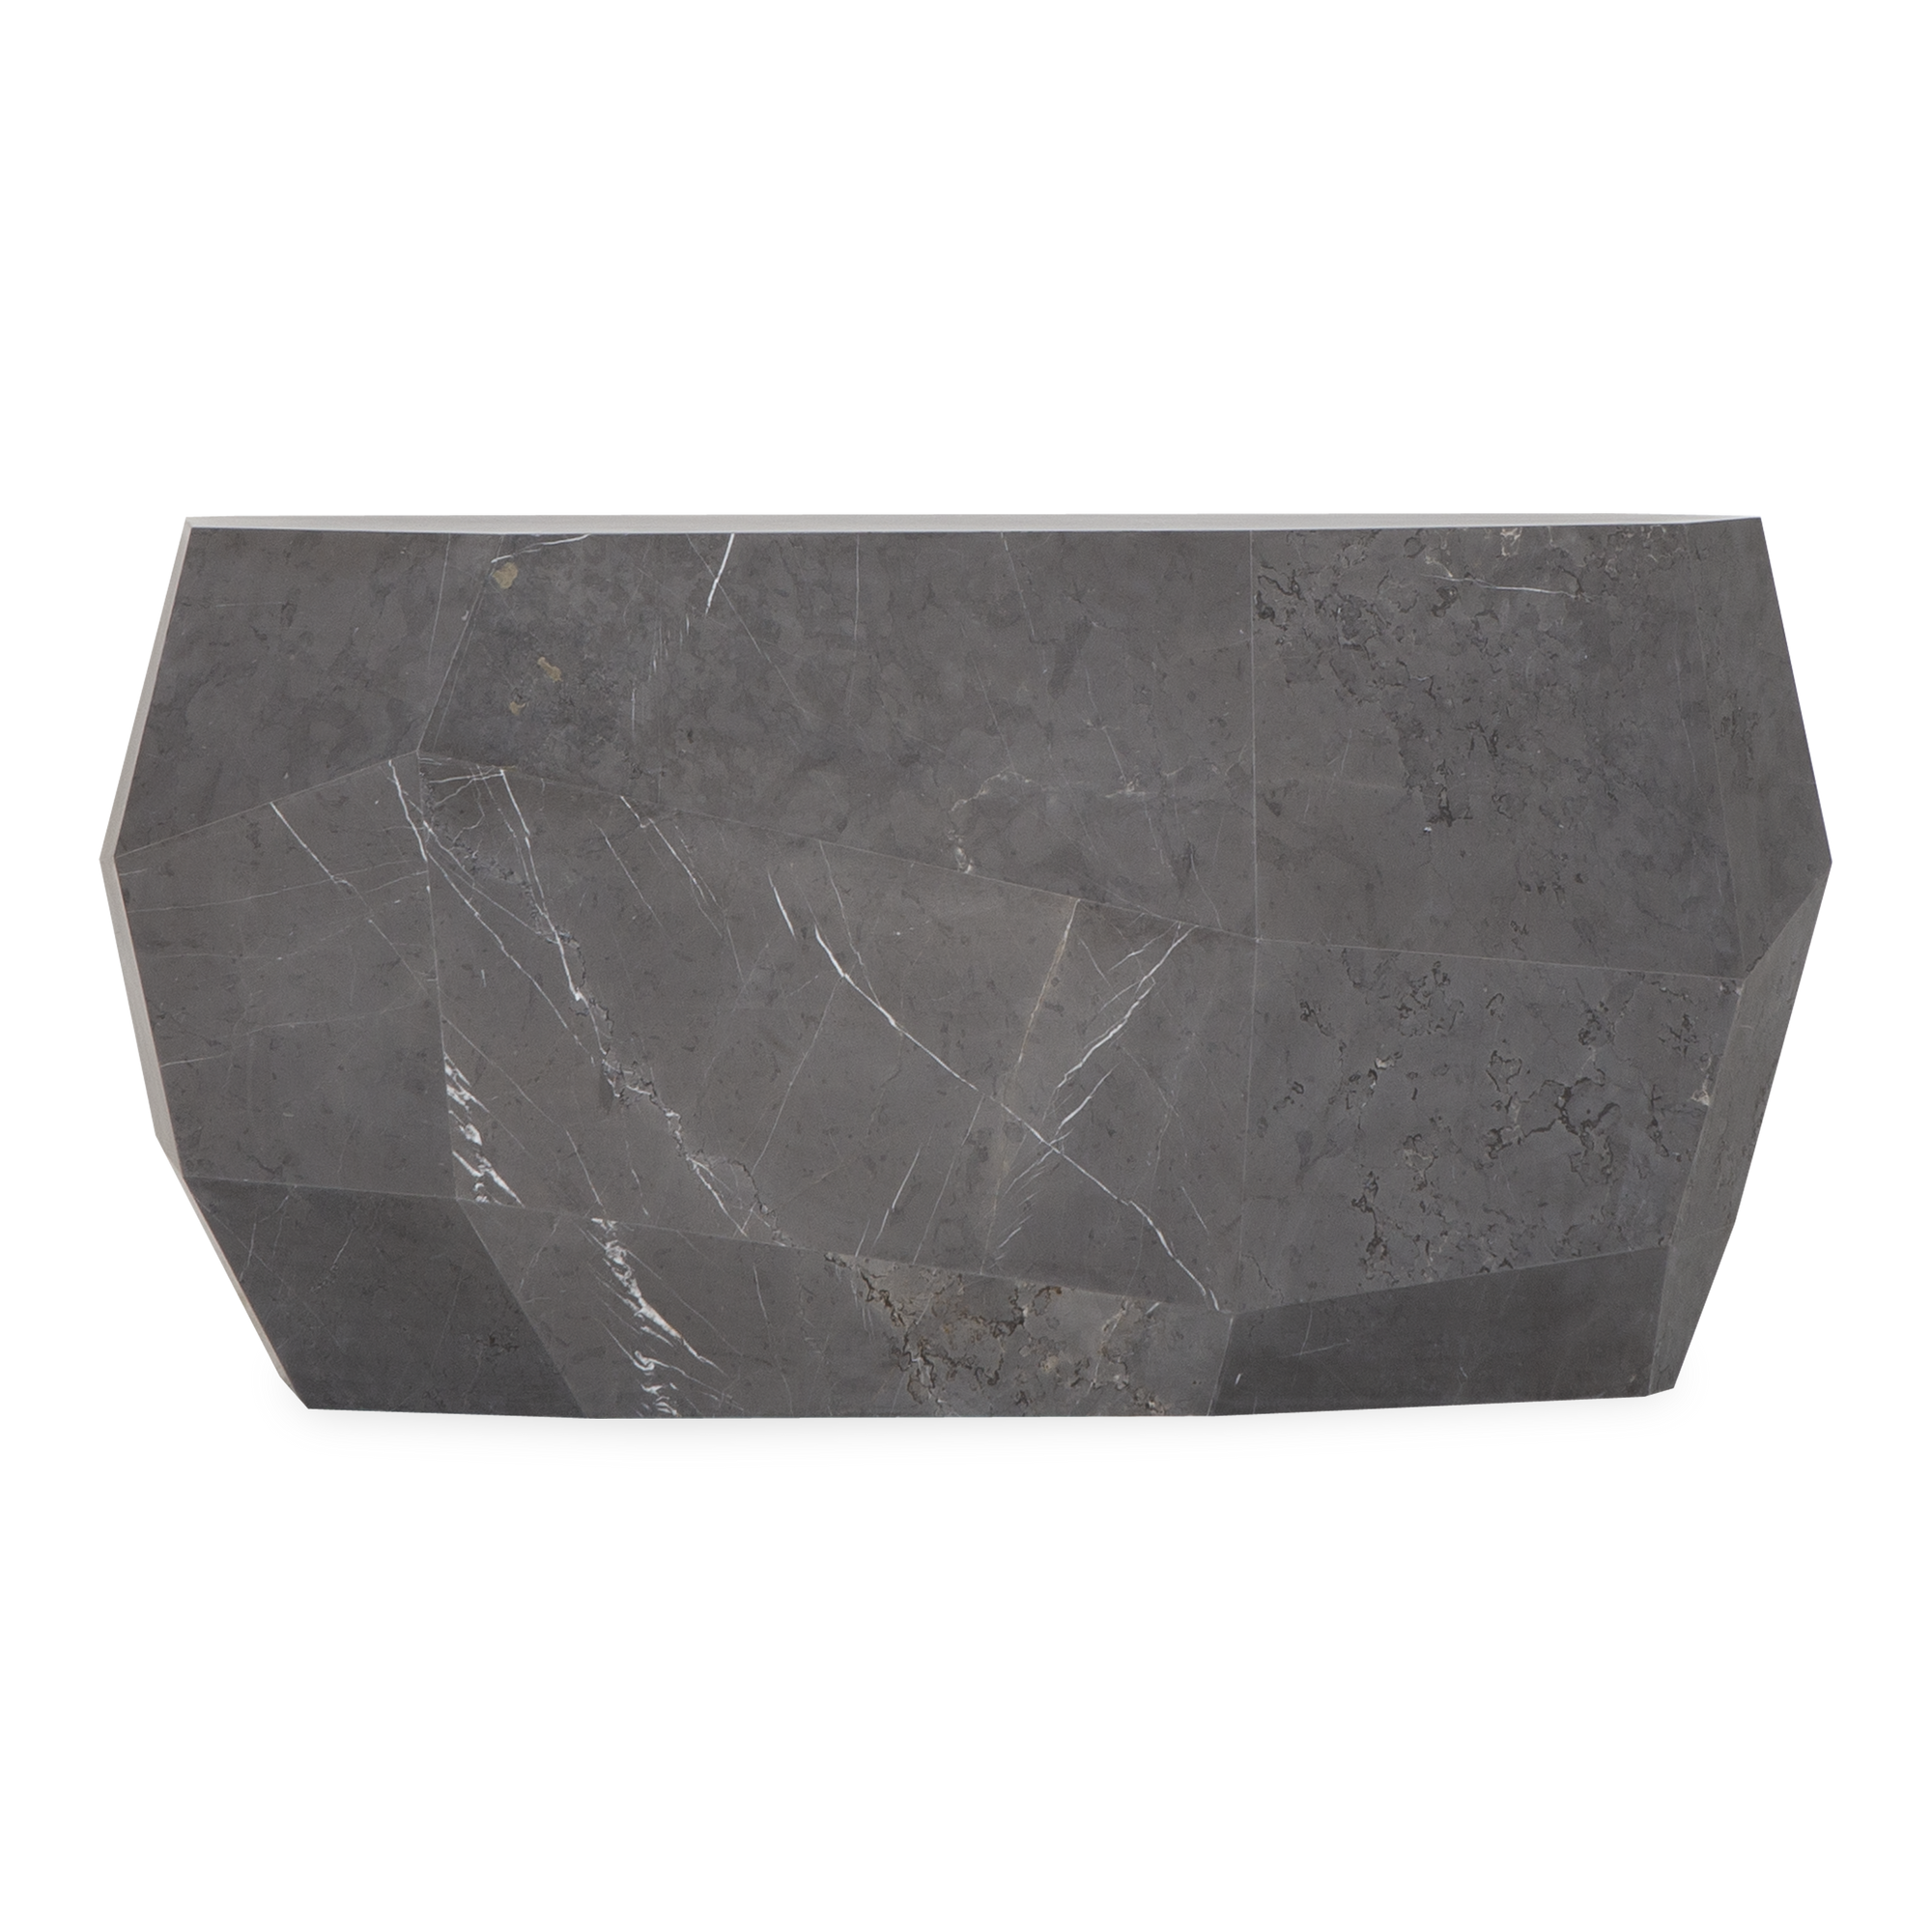 The Mineral Console Table celebrates stone in its most raw and natural form.